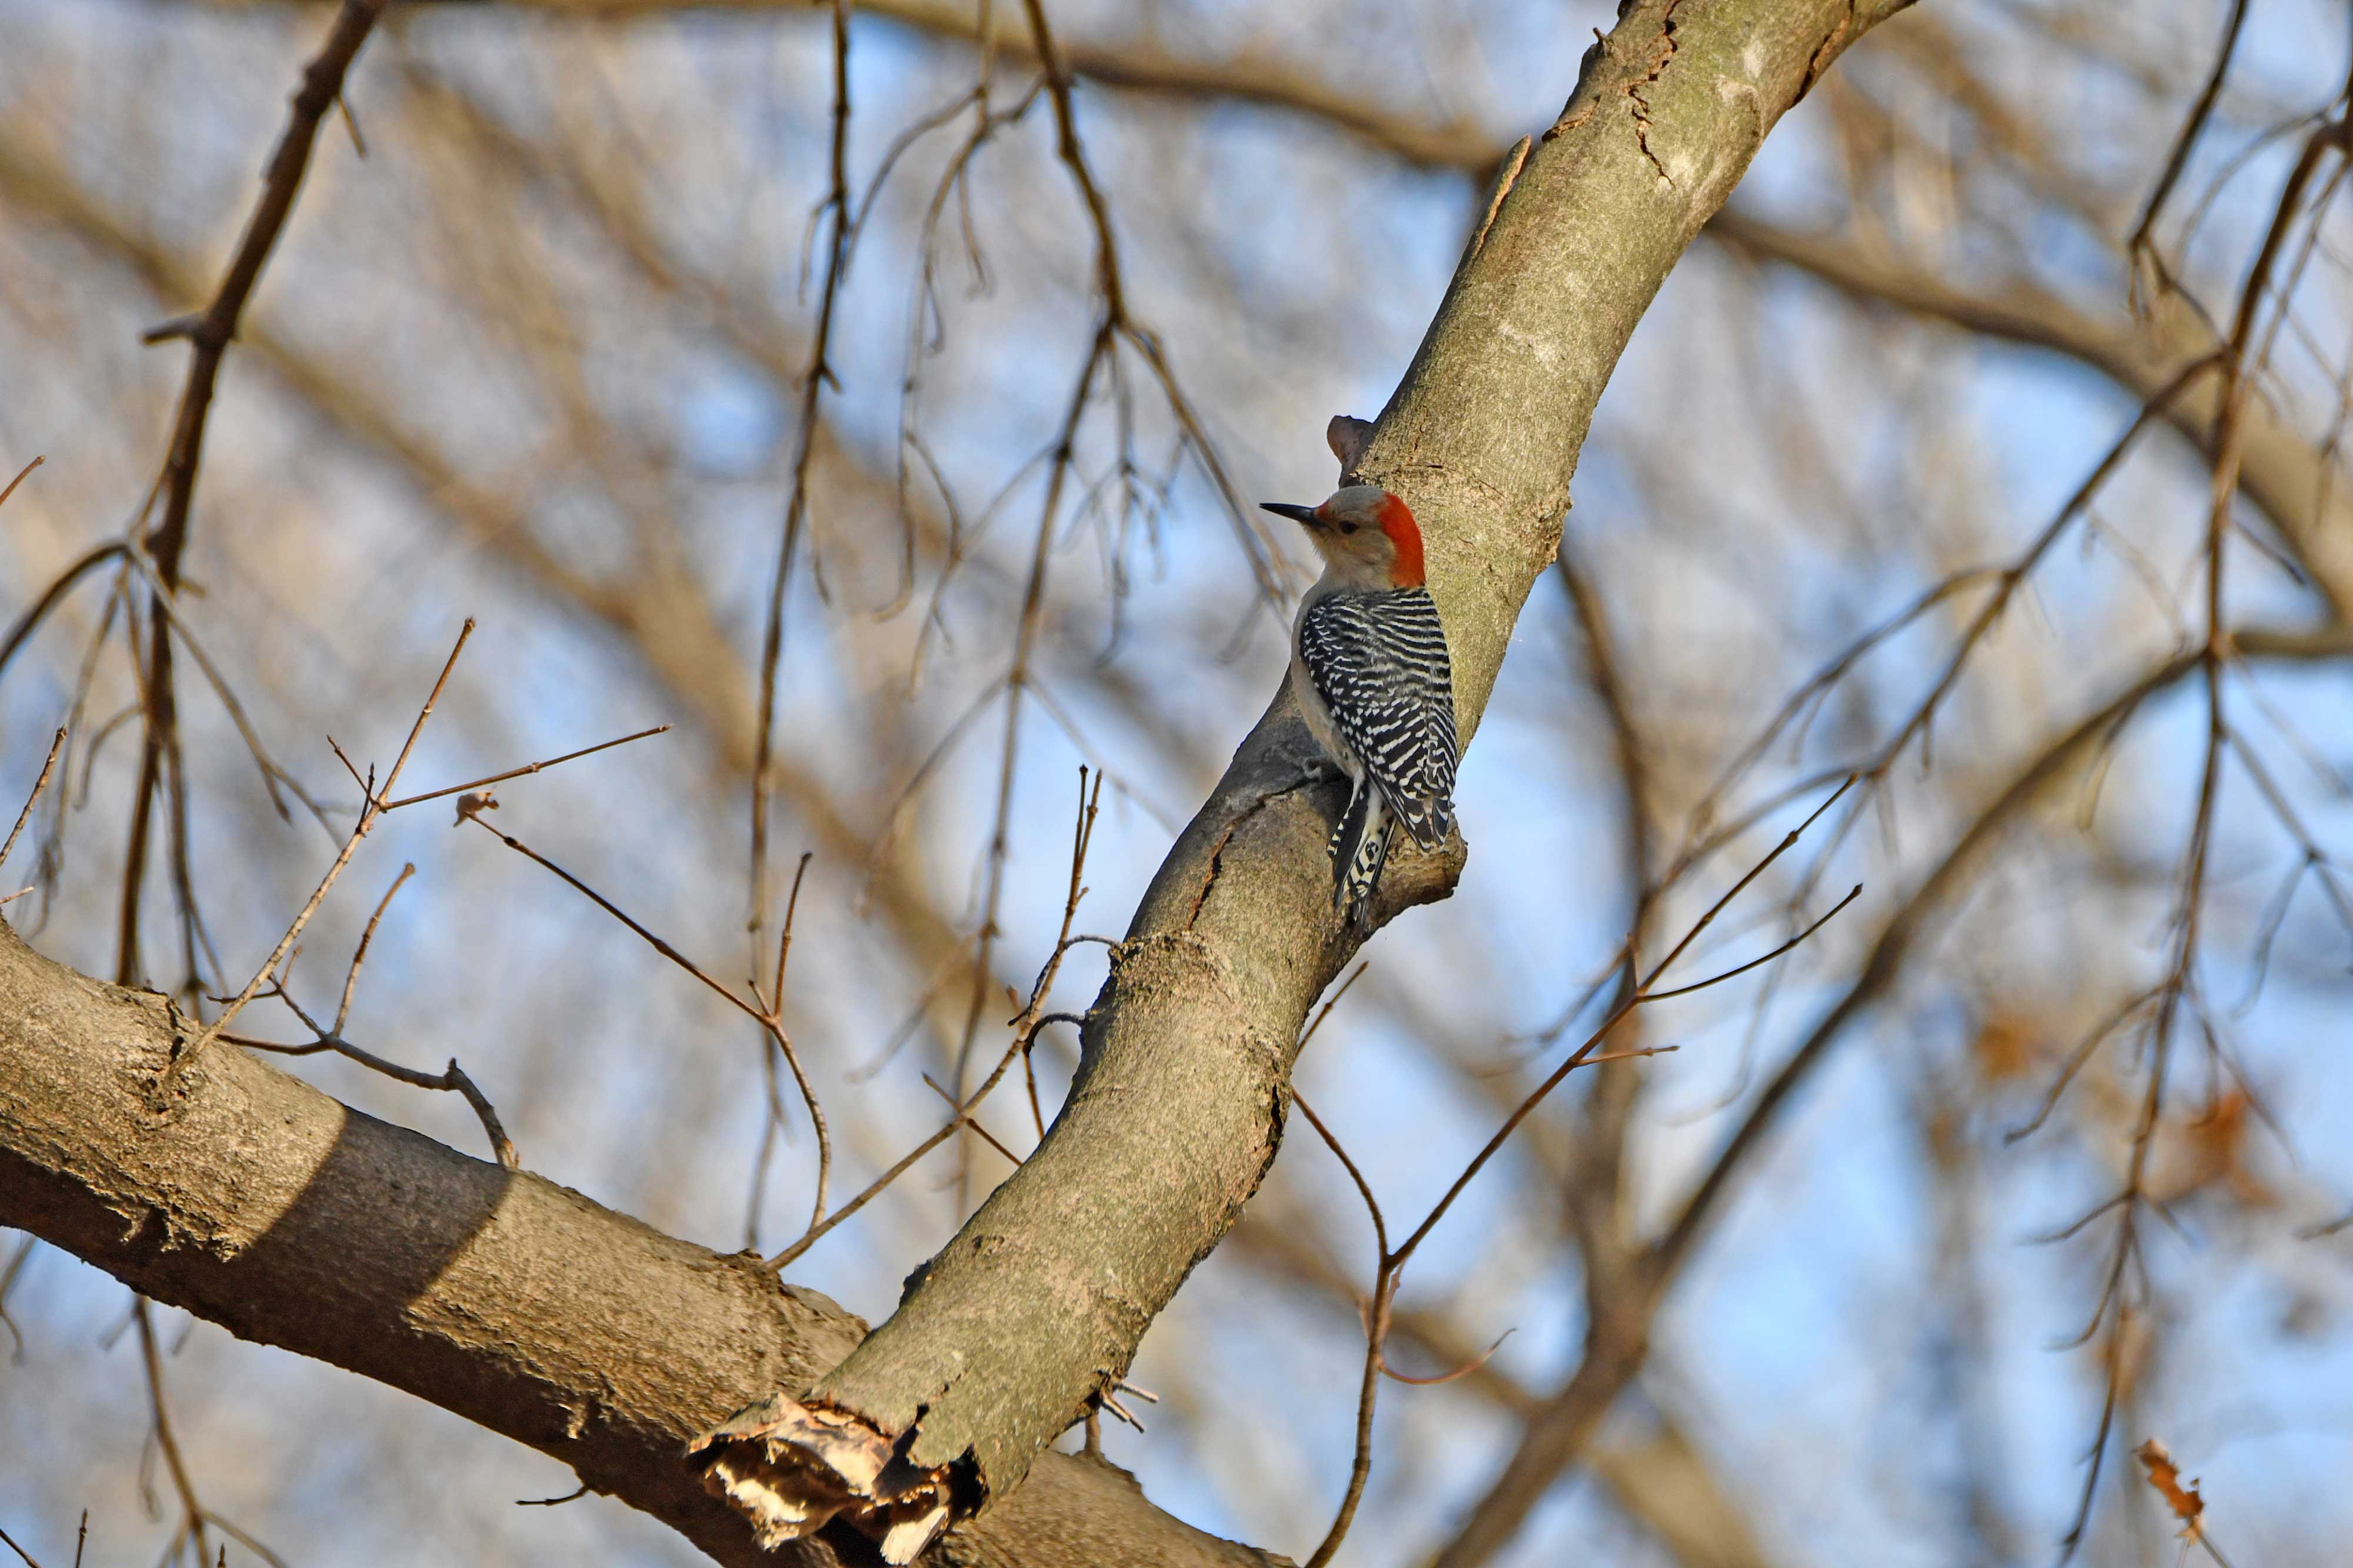 A red-bellied woodpecker, with its red head and black and white feathers, sits on a tree.